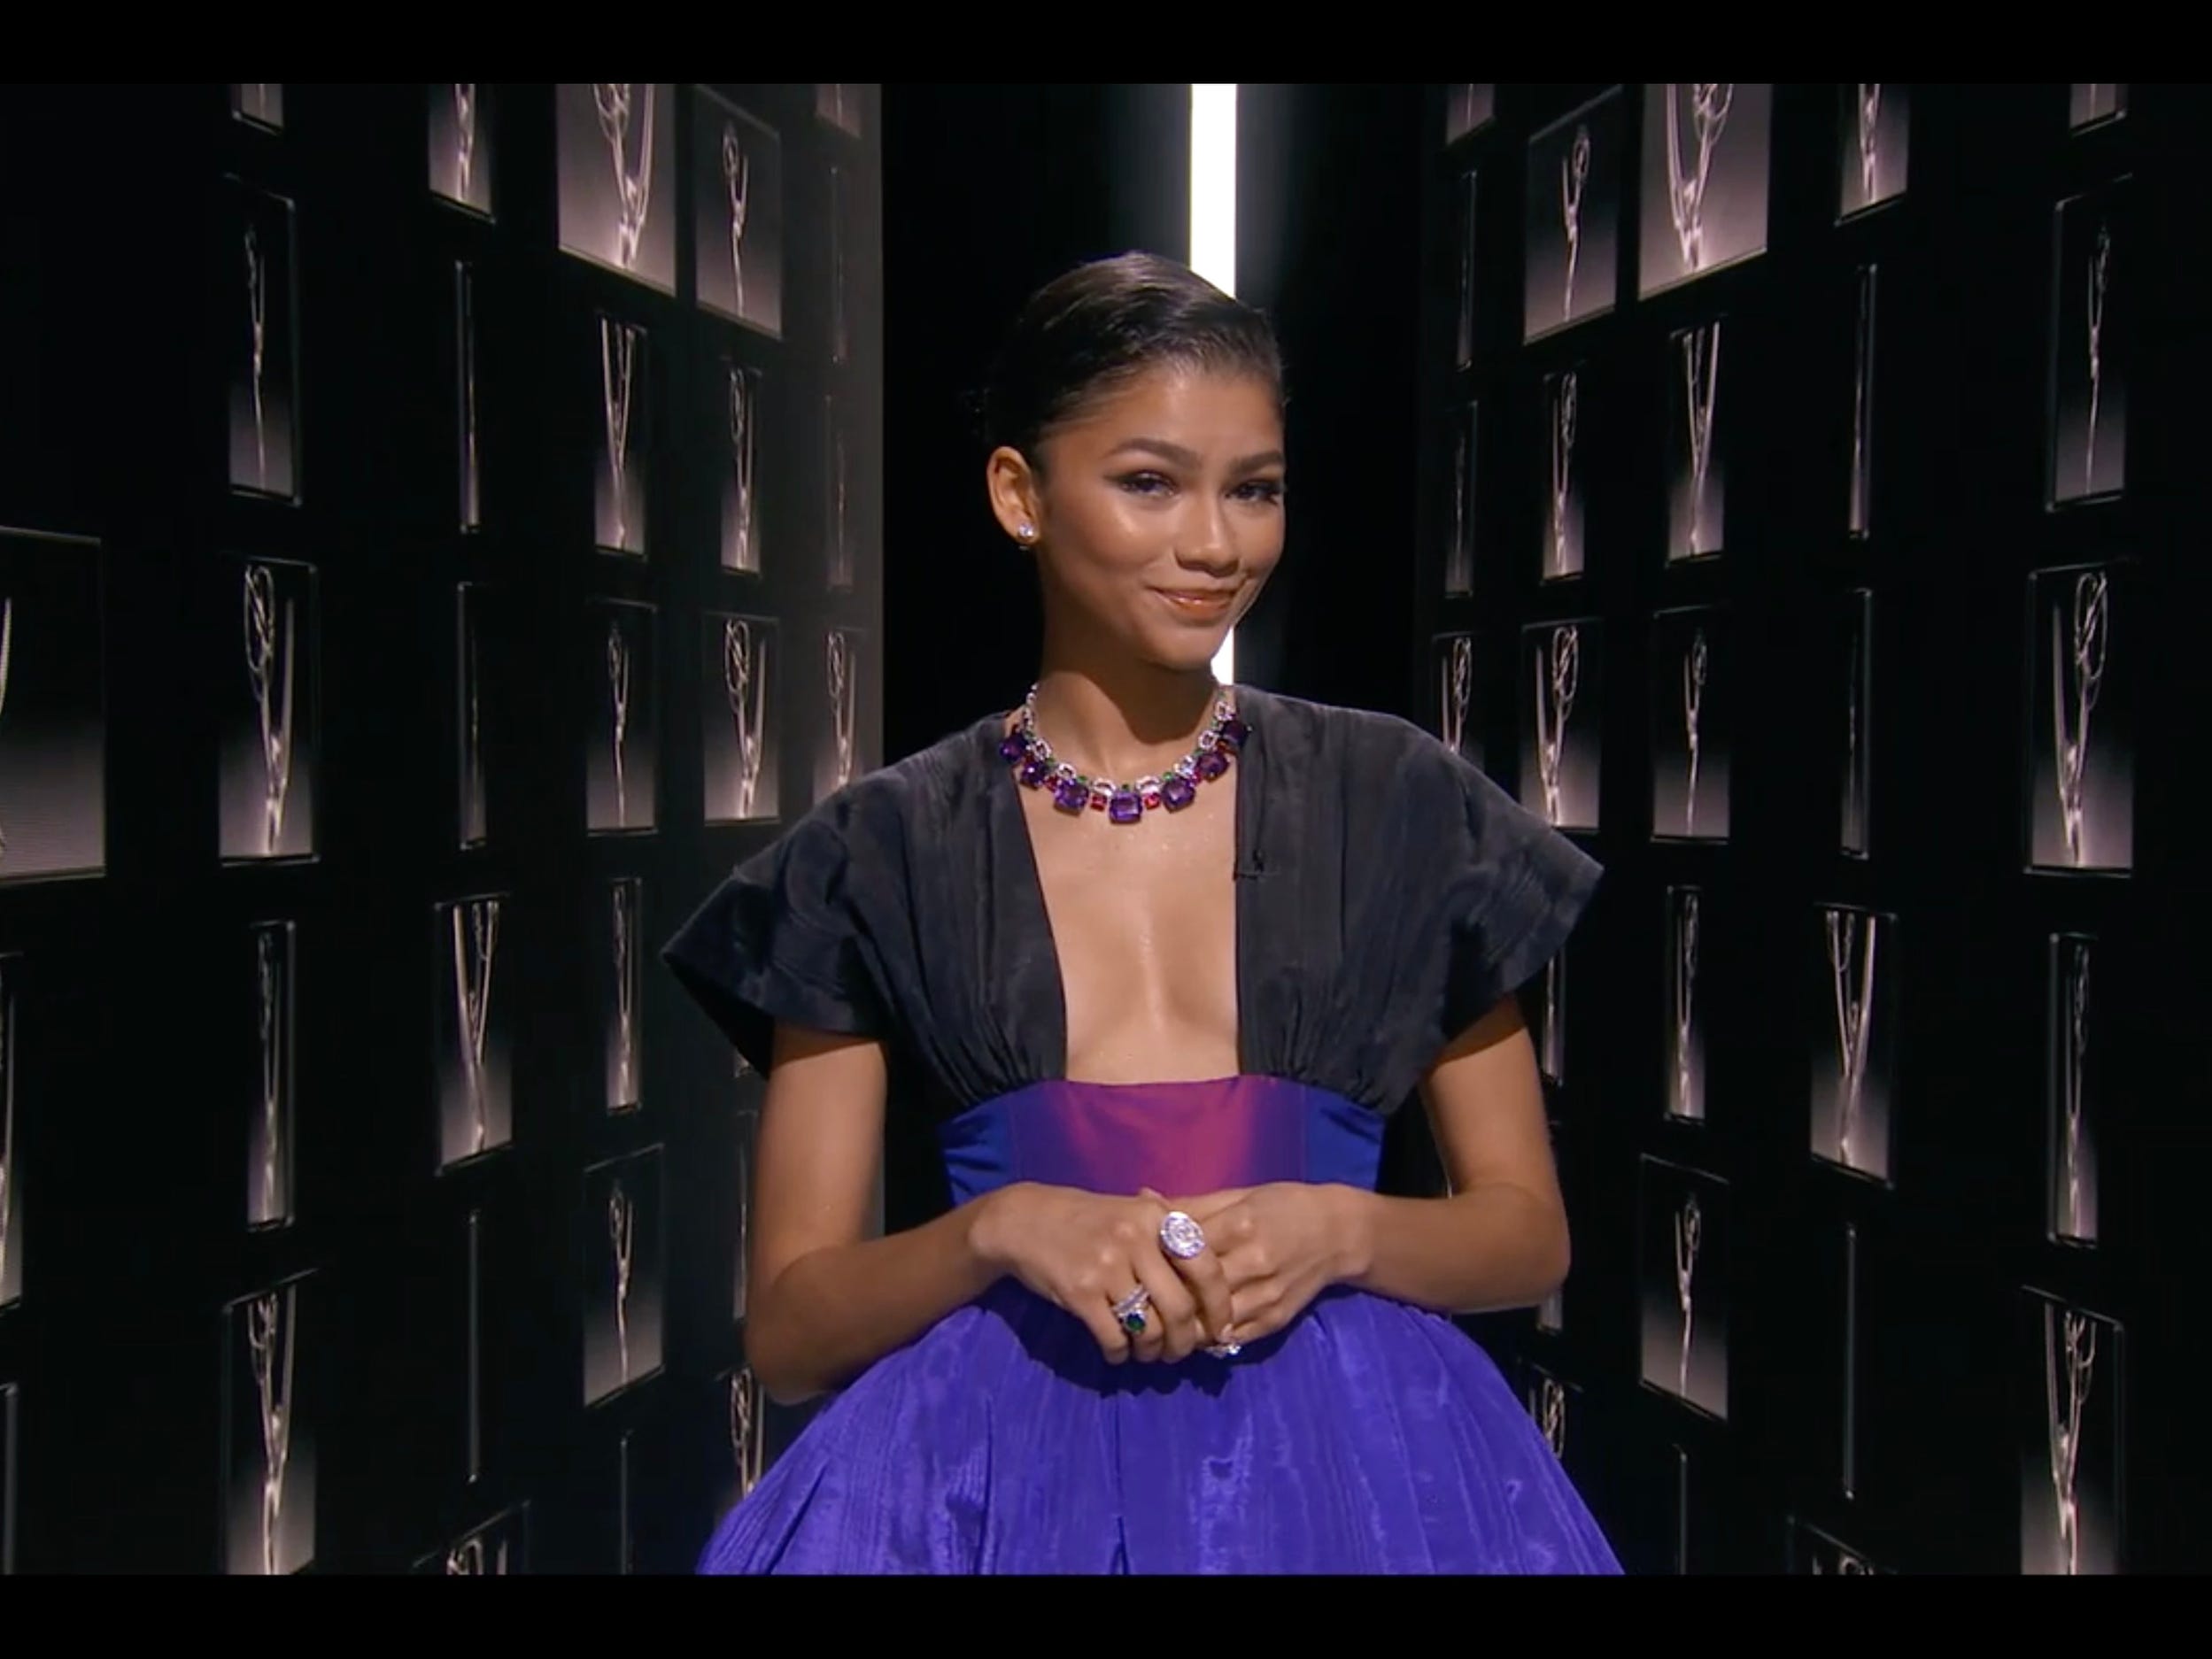 Sims also styled Zendaya's hair for her presenter look at the Emmys.